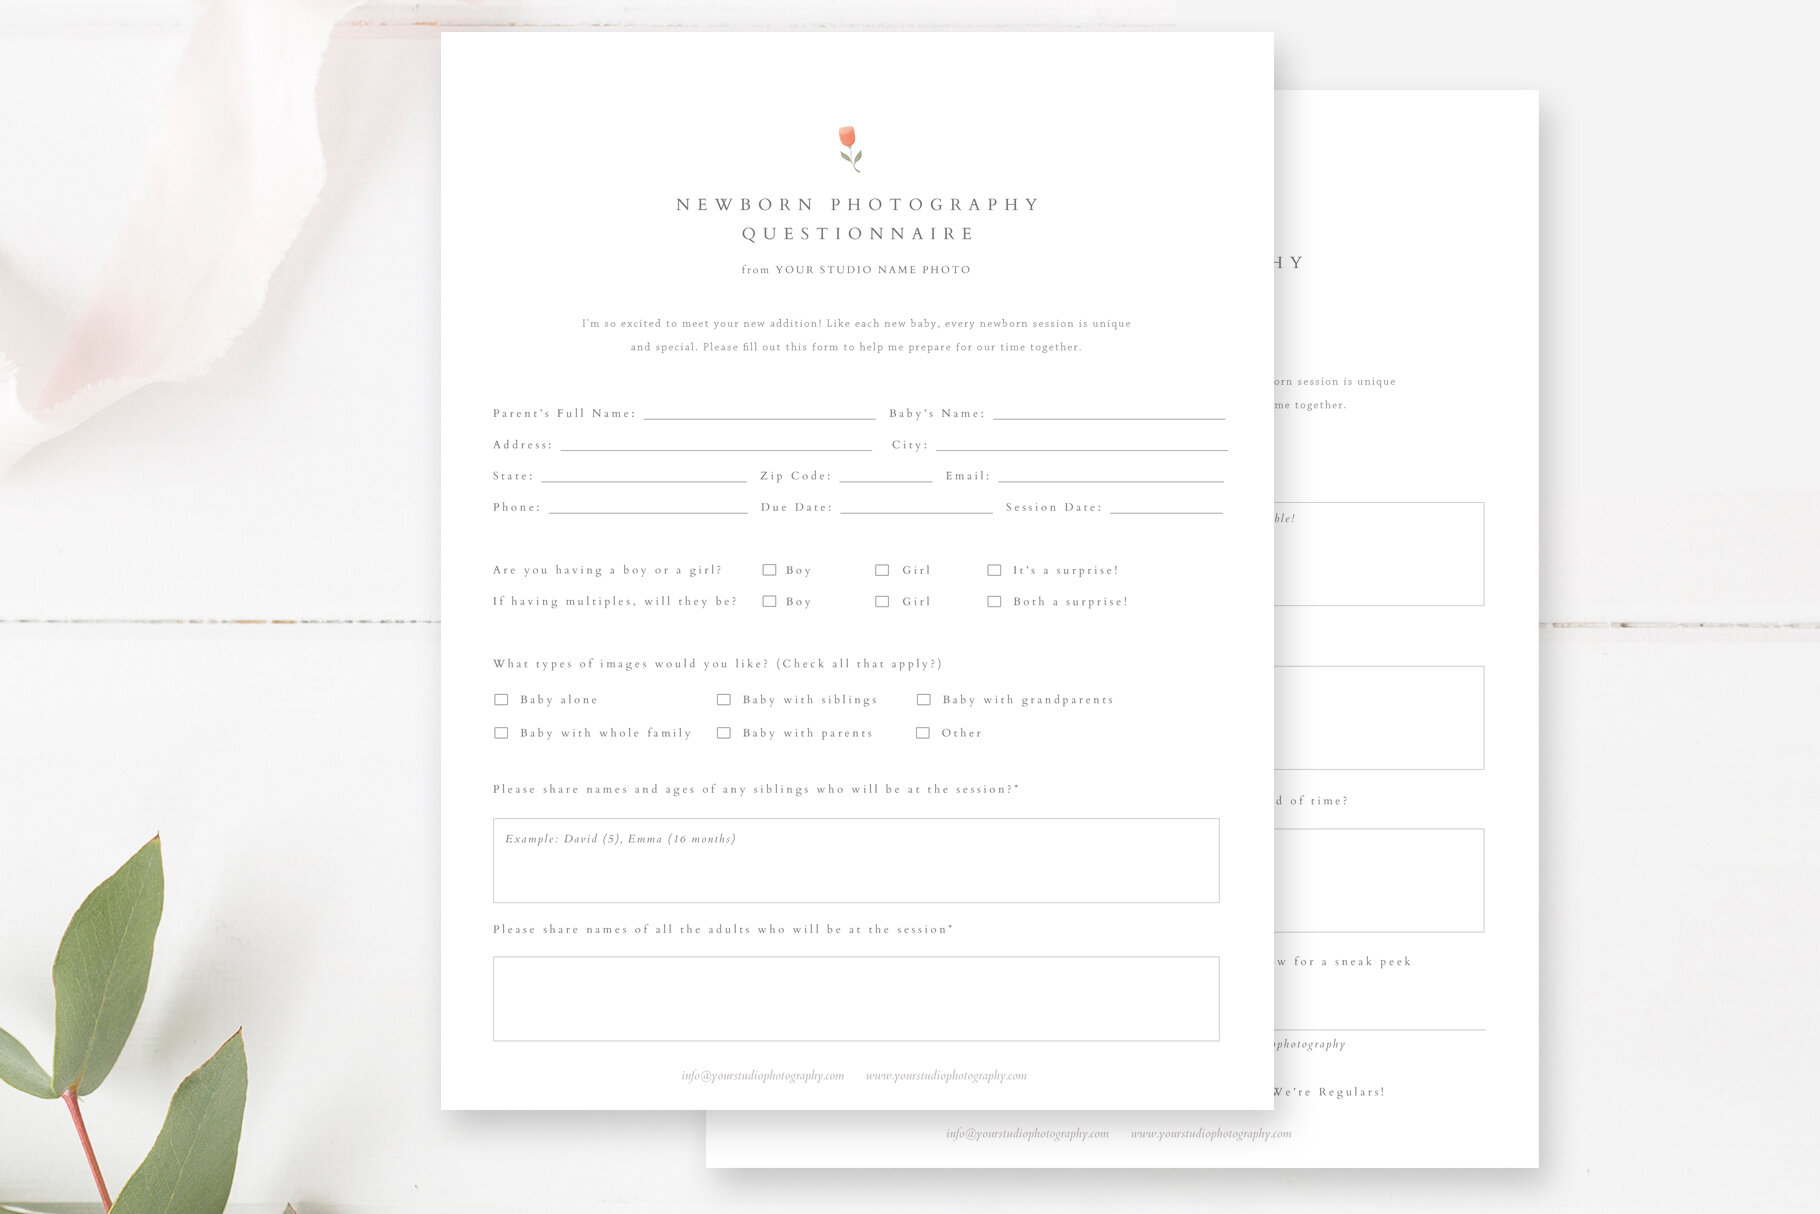 Newborn Photography Business Forms Bundle, Photoshop Templates for ...